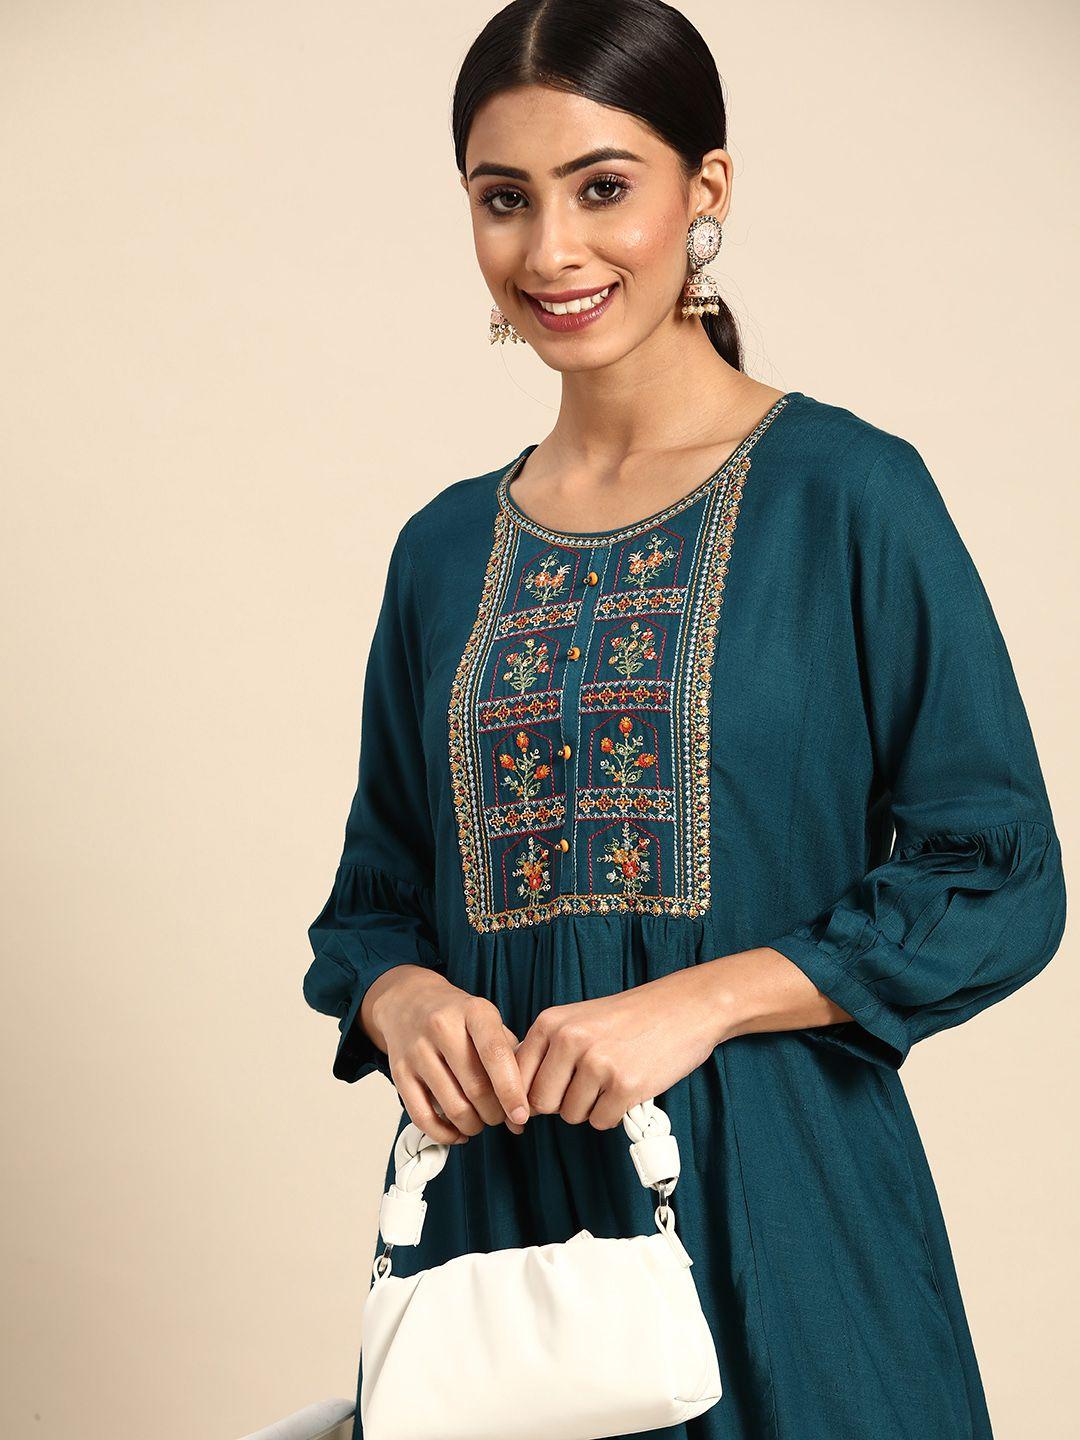 sangria-teal-blue-floral-embroidered-pleated-a-line-top